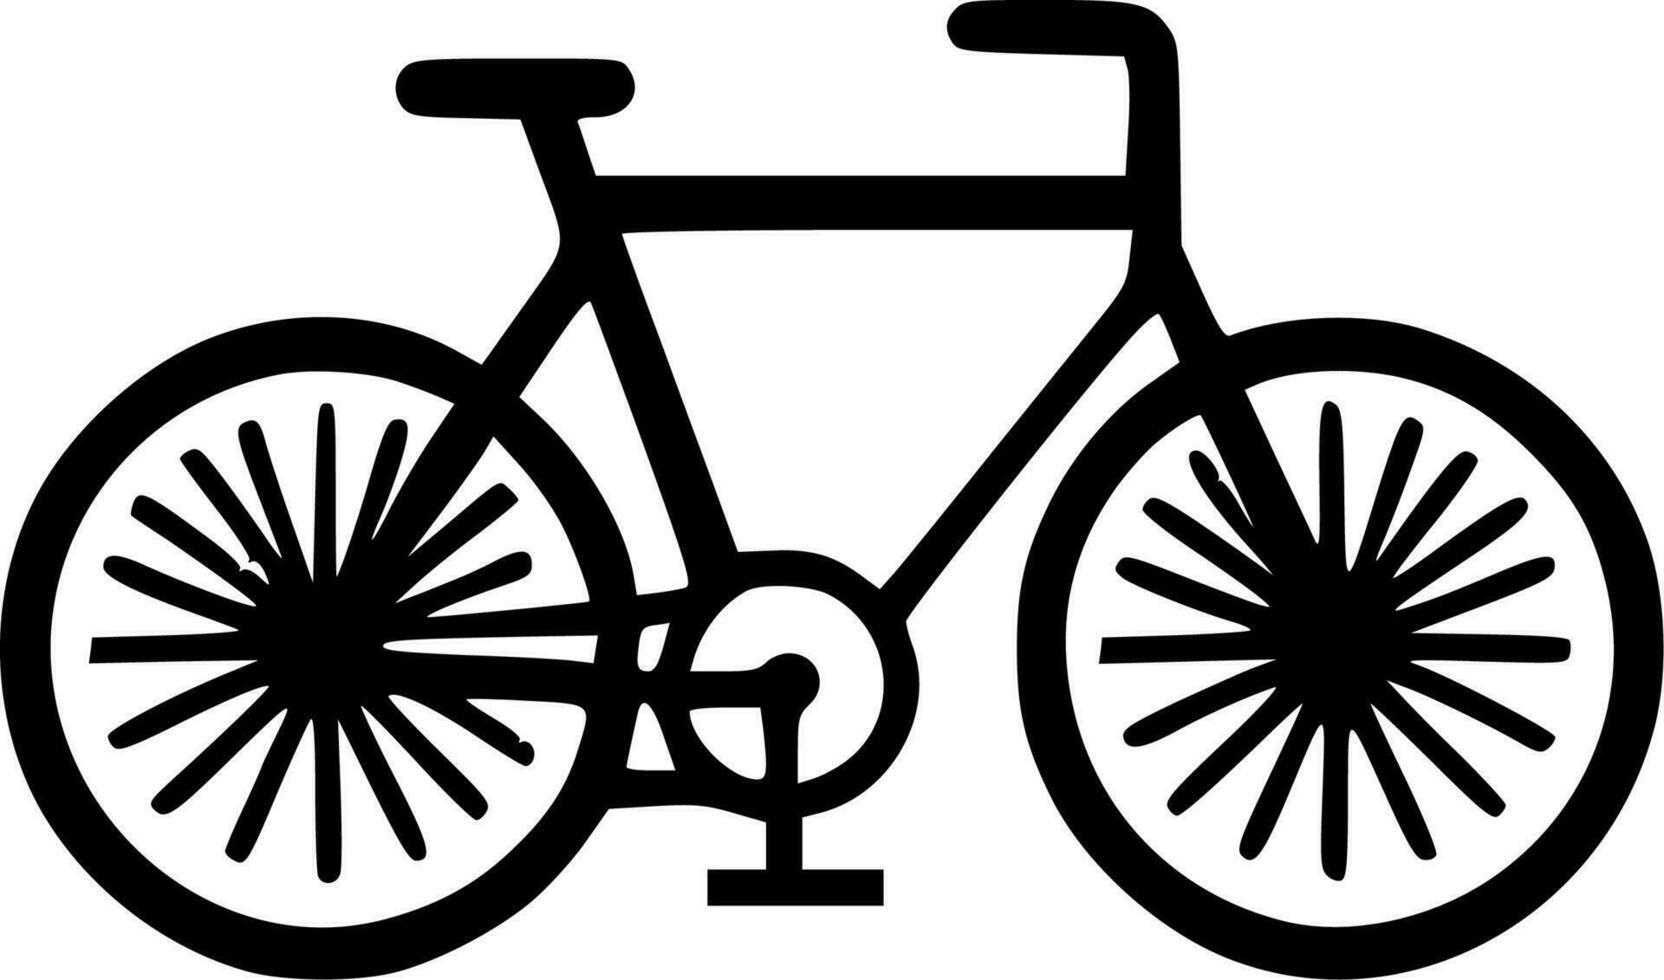 Bike - High Quality Vector Logo - Vector illustration ideal for T-shirt graphic